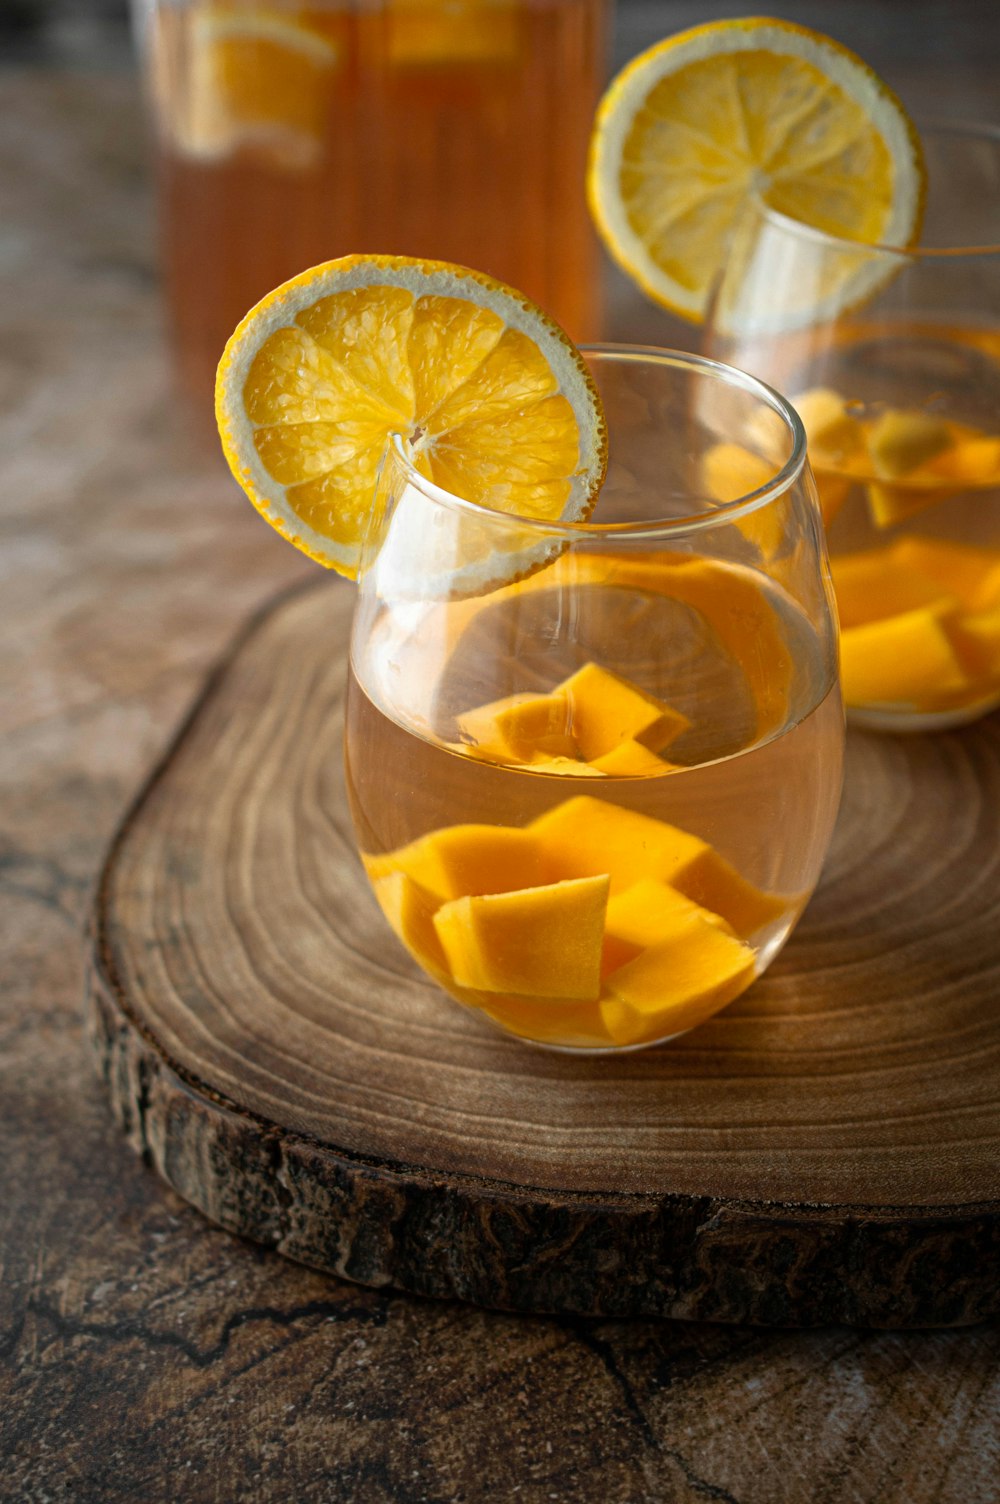 clear drinking glass with orange juice